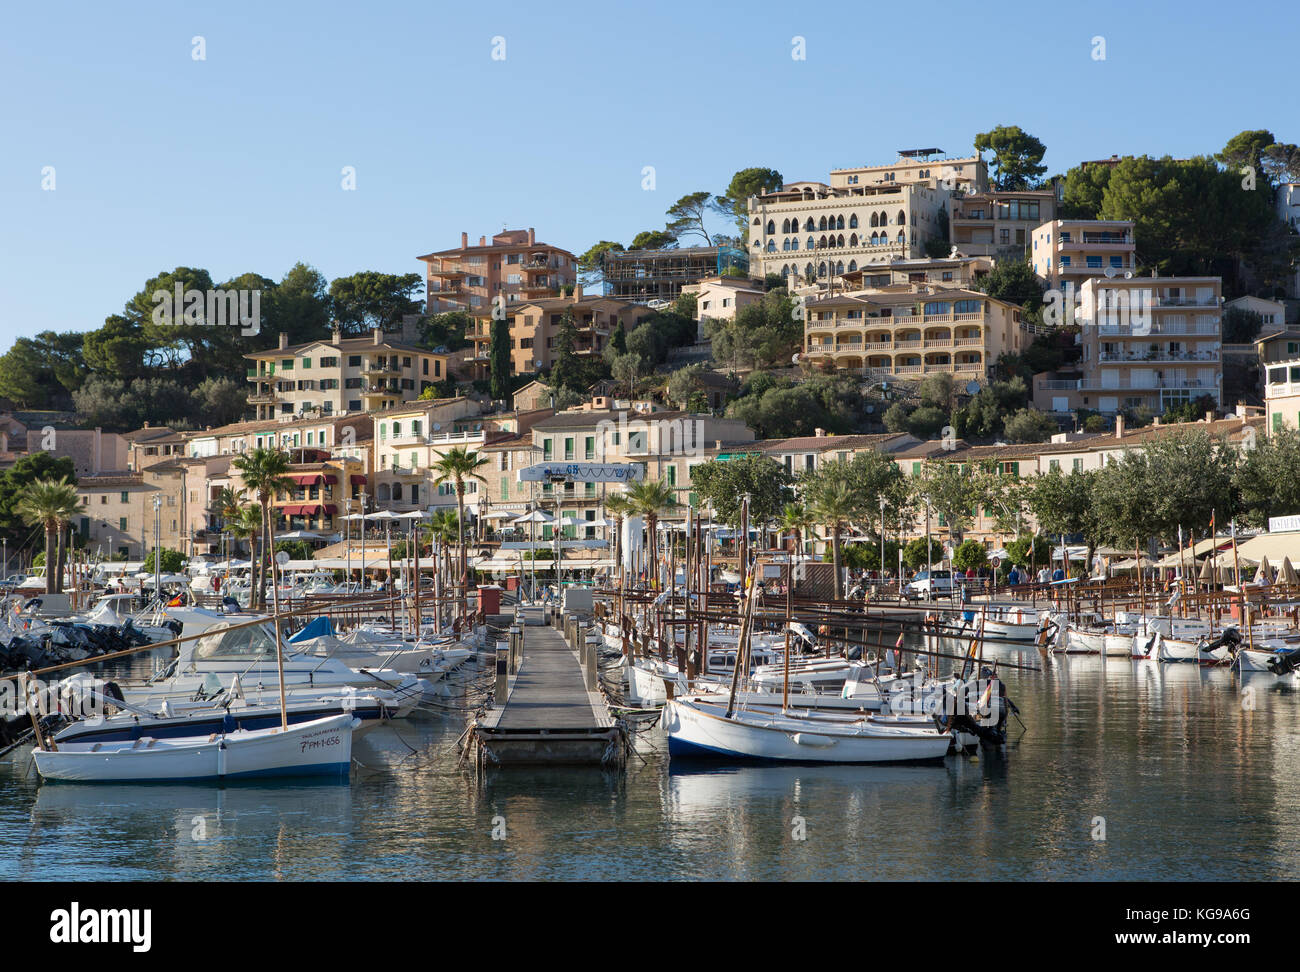 Boats moored at harbour, town in background, Andratx, Majorca, Balearic Islands, Spain. Stock Photo